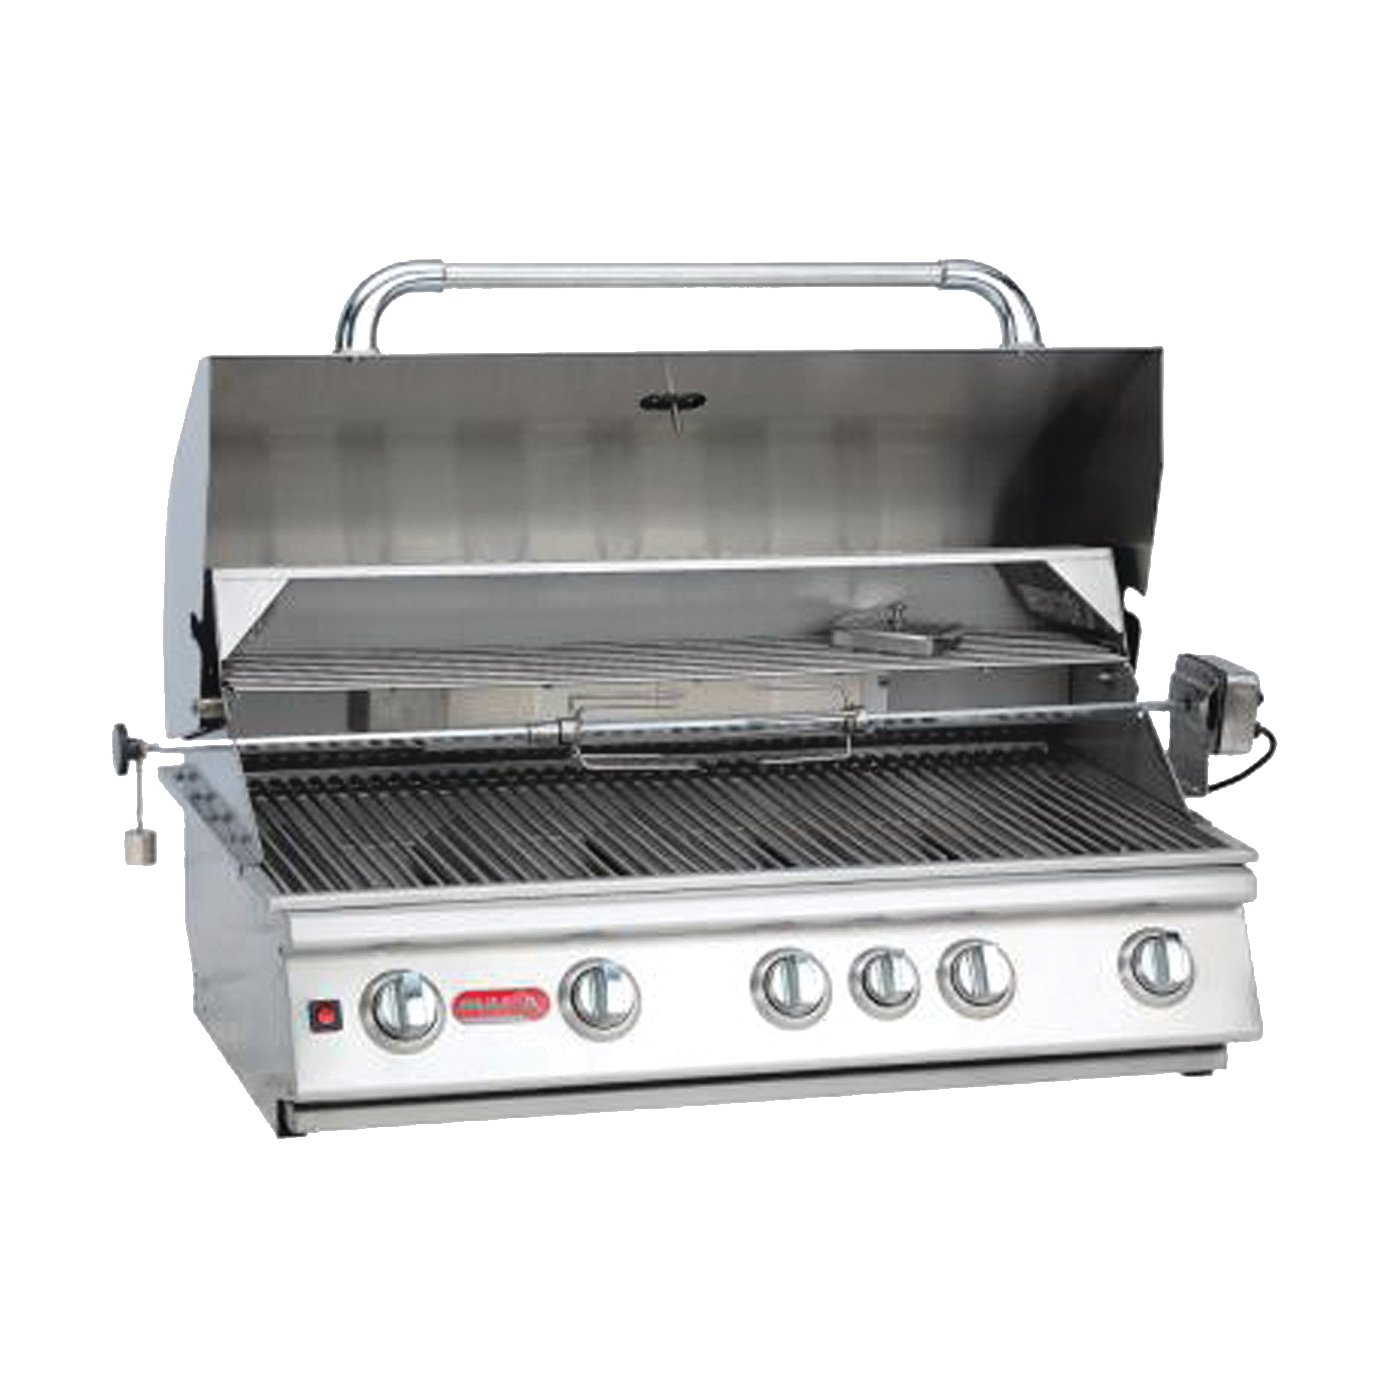 Brahma 57569 Gas Grill Head, 90000 Btu, Natural Gas, 5-Burner, 266 sq-in Secondary Cooking Surface